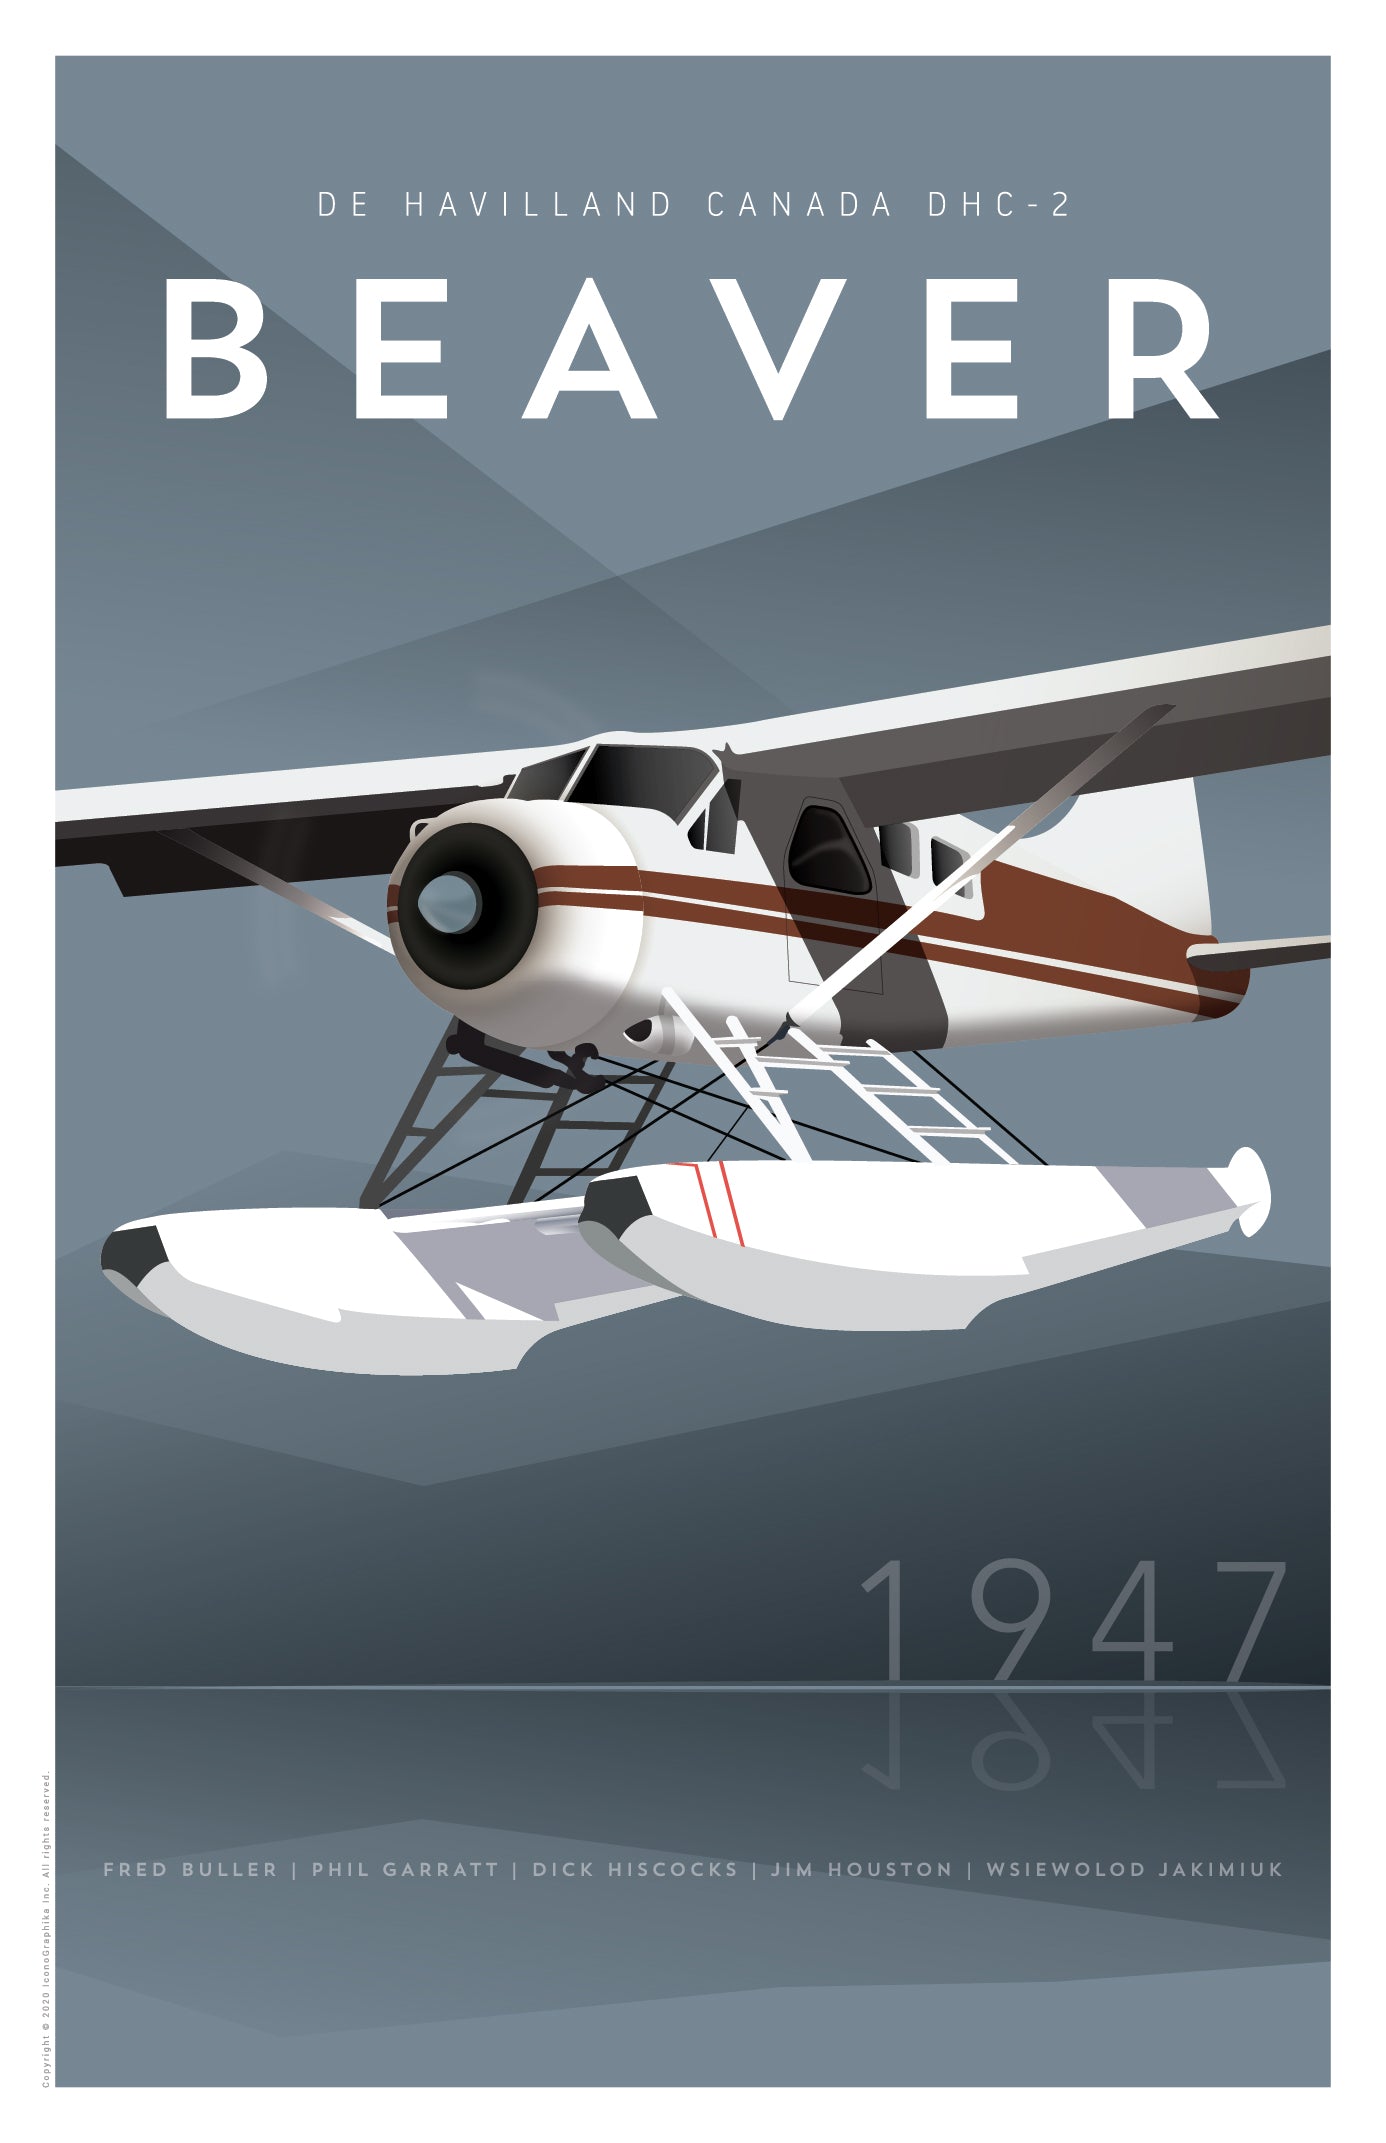 Iconic DHC-2 Beaver receives 'first in the world' RED Engine